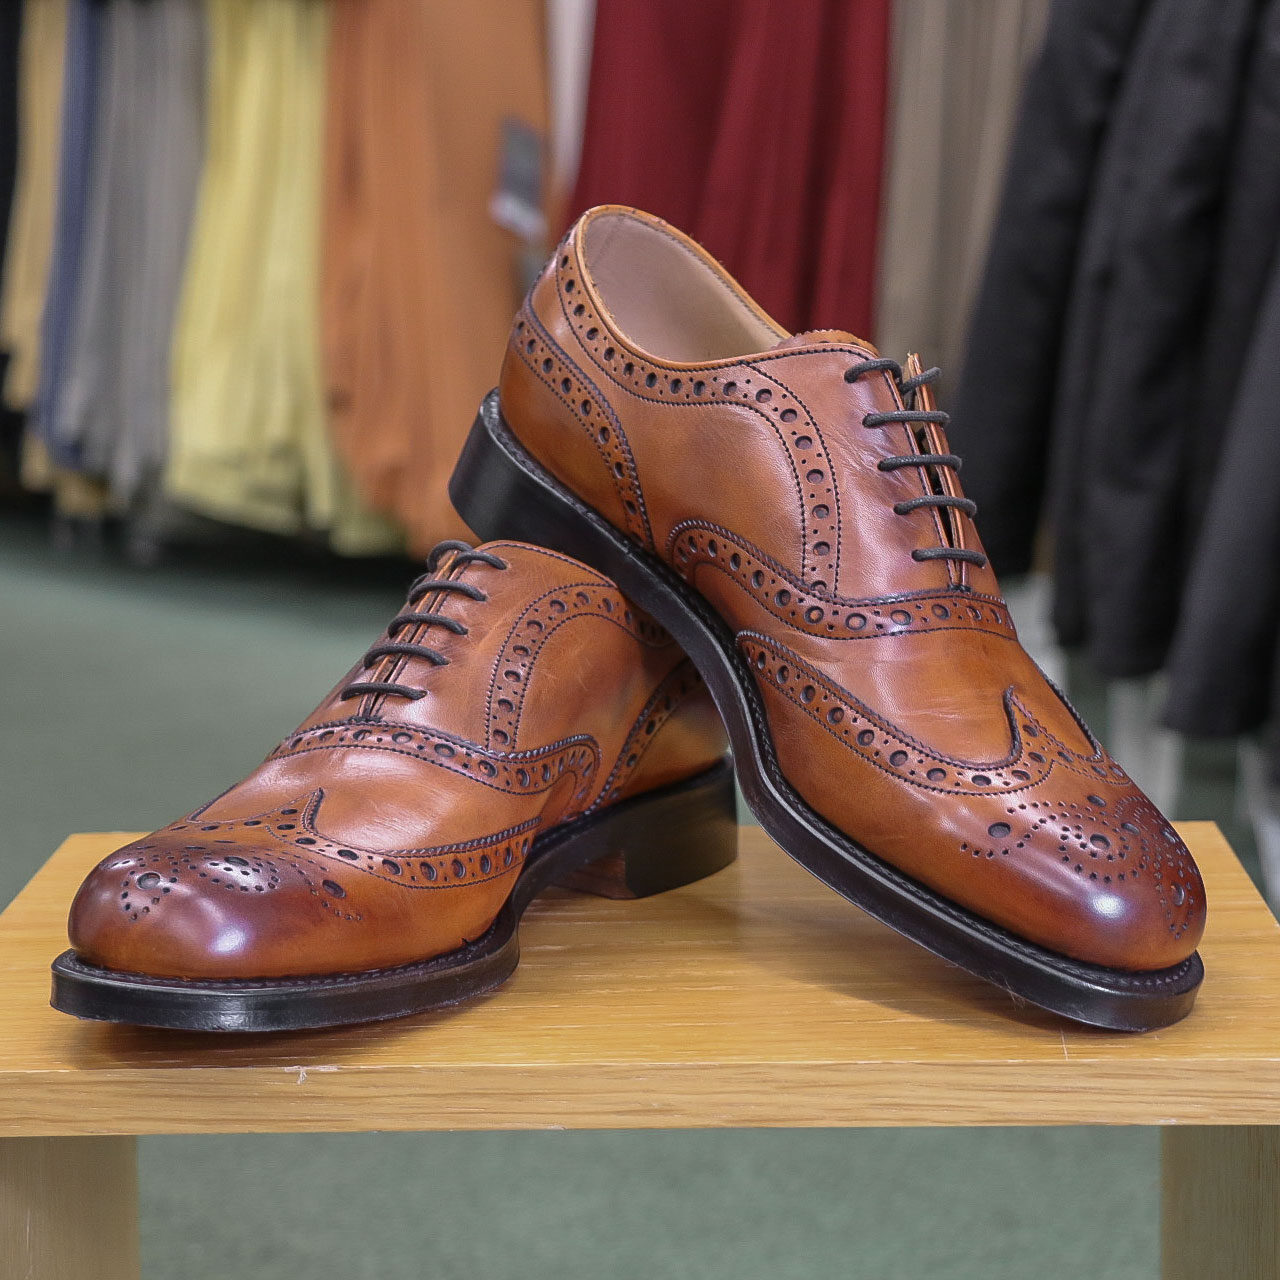 Joseph Cheaney & Sons Leaf Brown Chean Tay Shoes - County Clothes